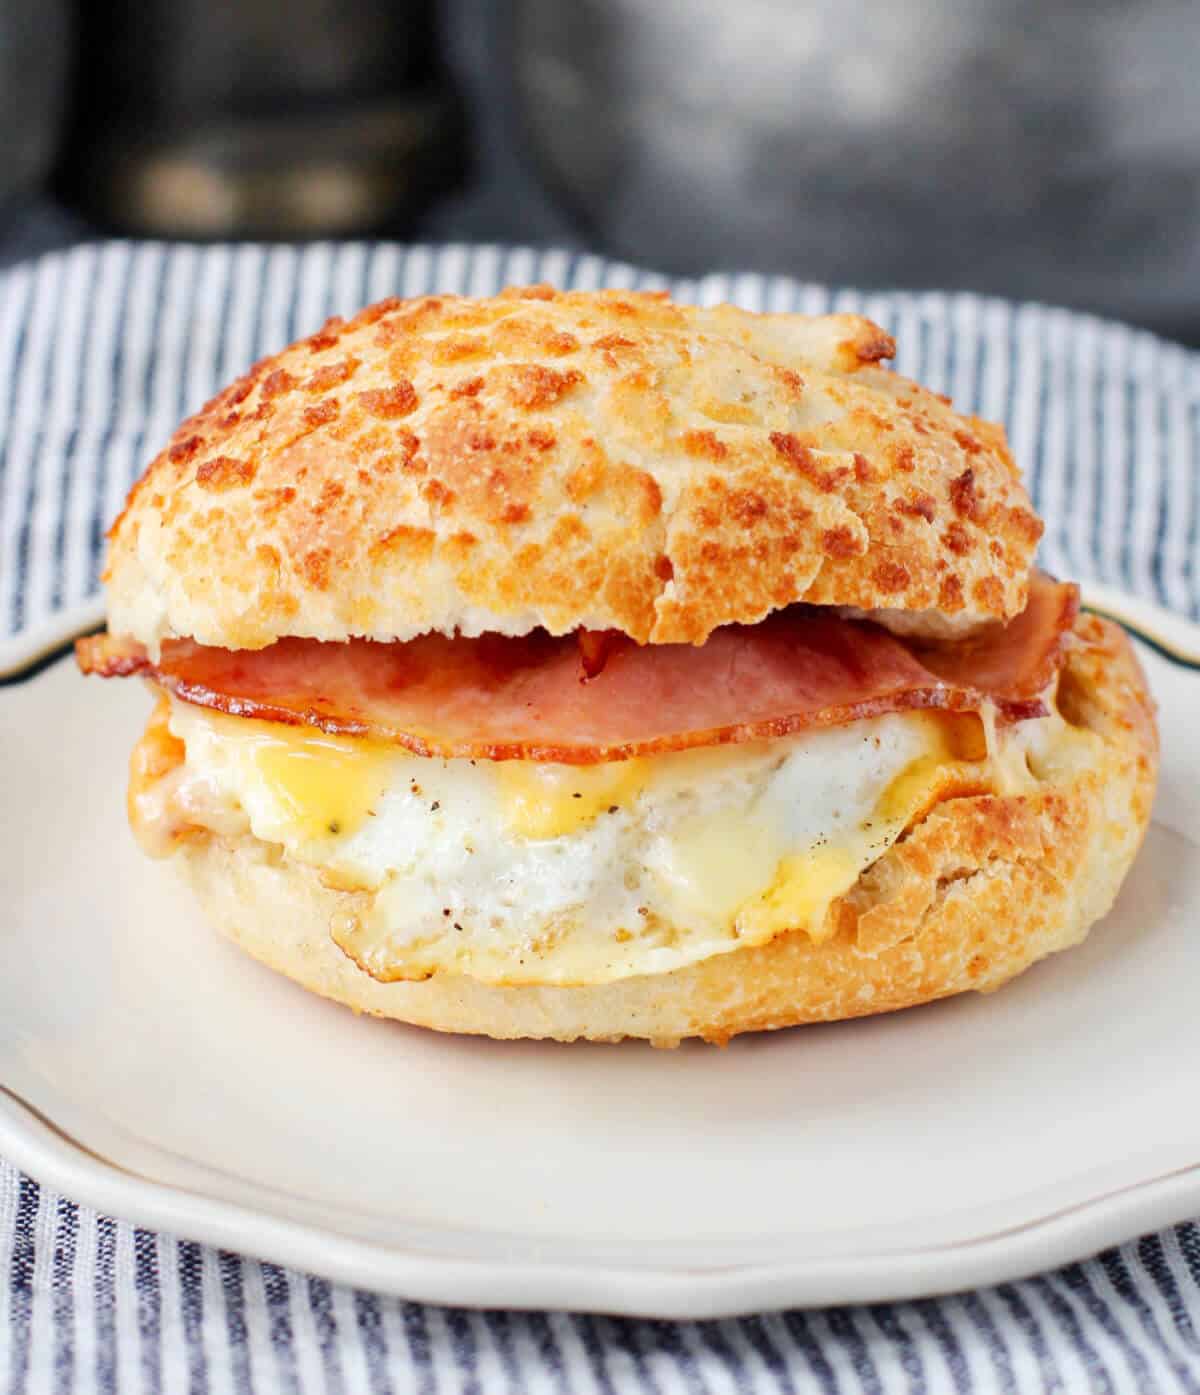 Tiger Bread Roll breakfast sandwich with egg, cheese, and ham.